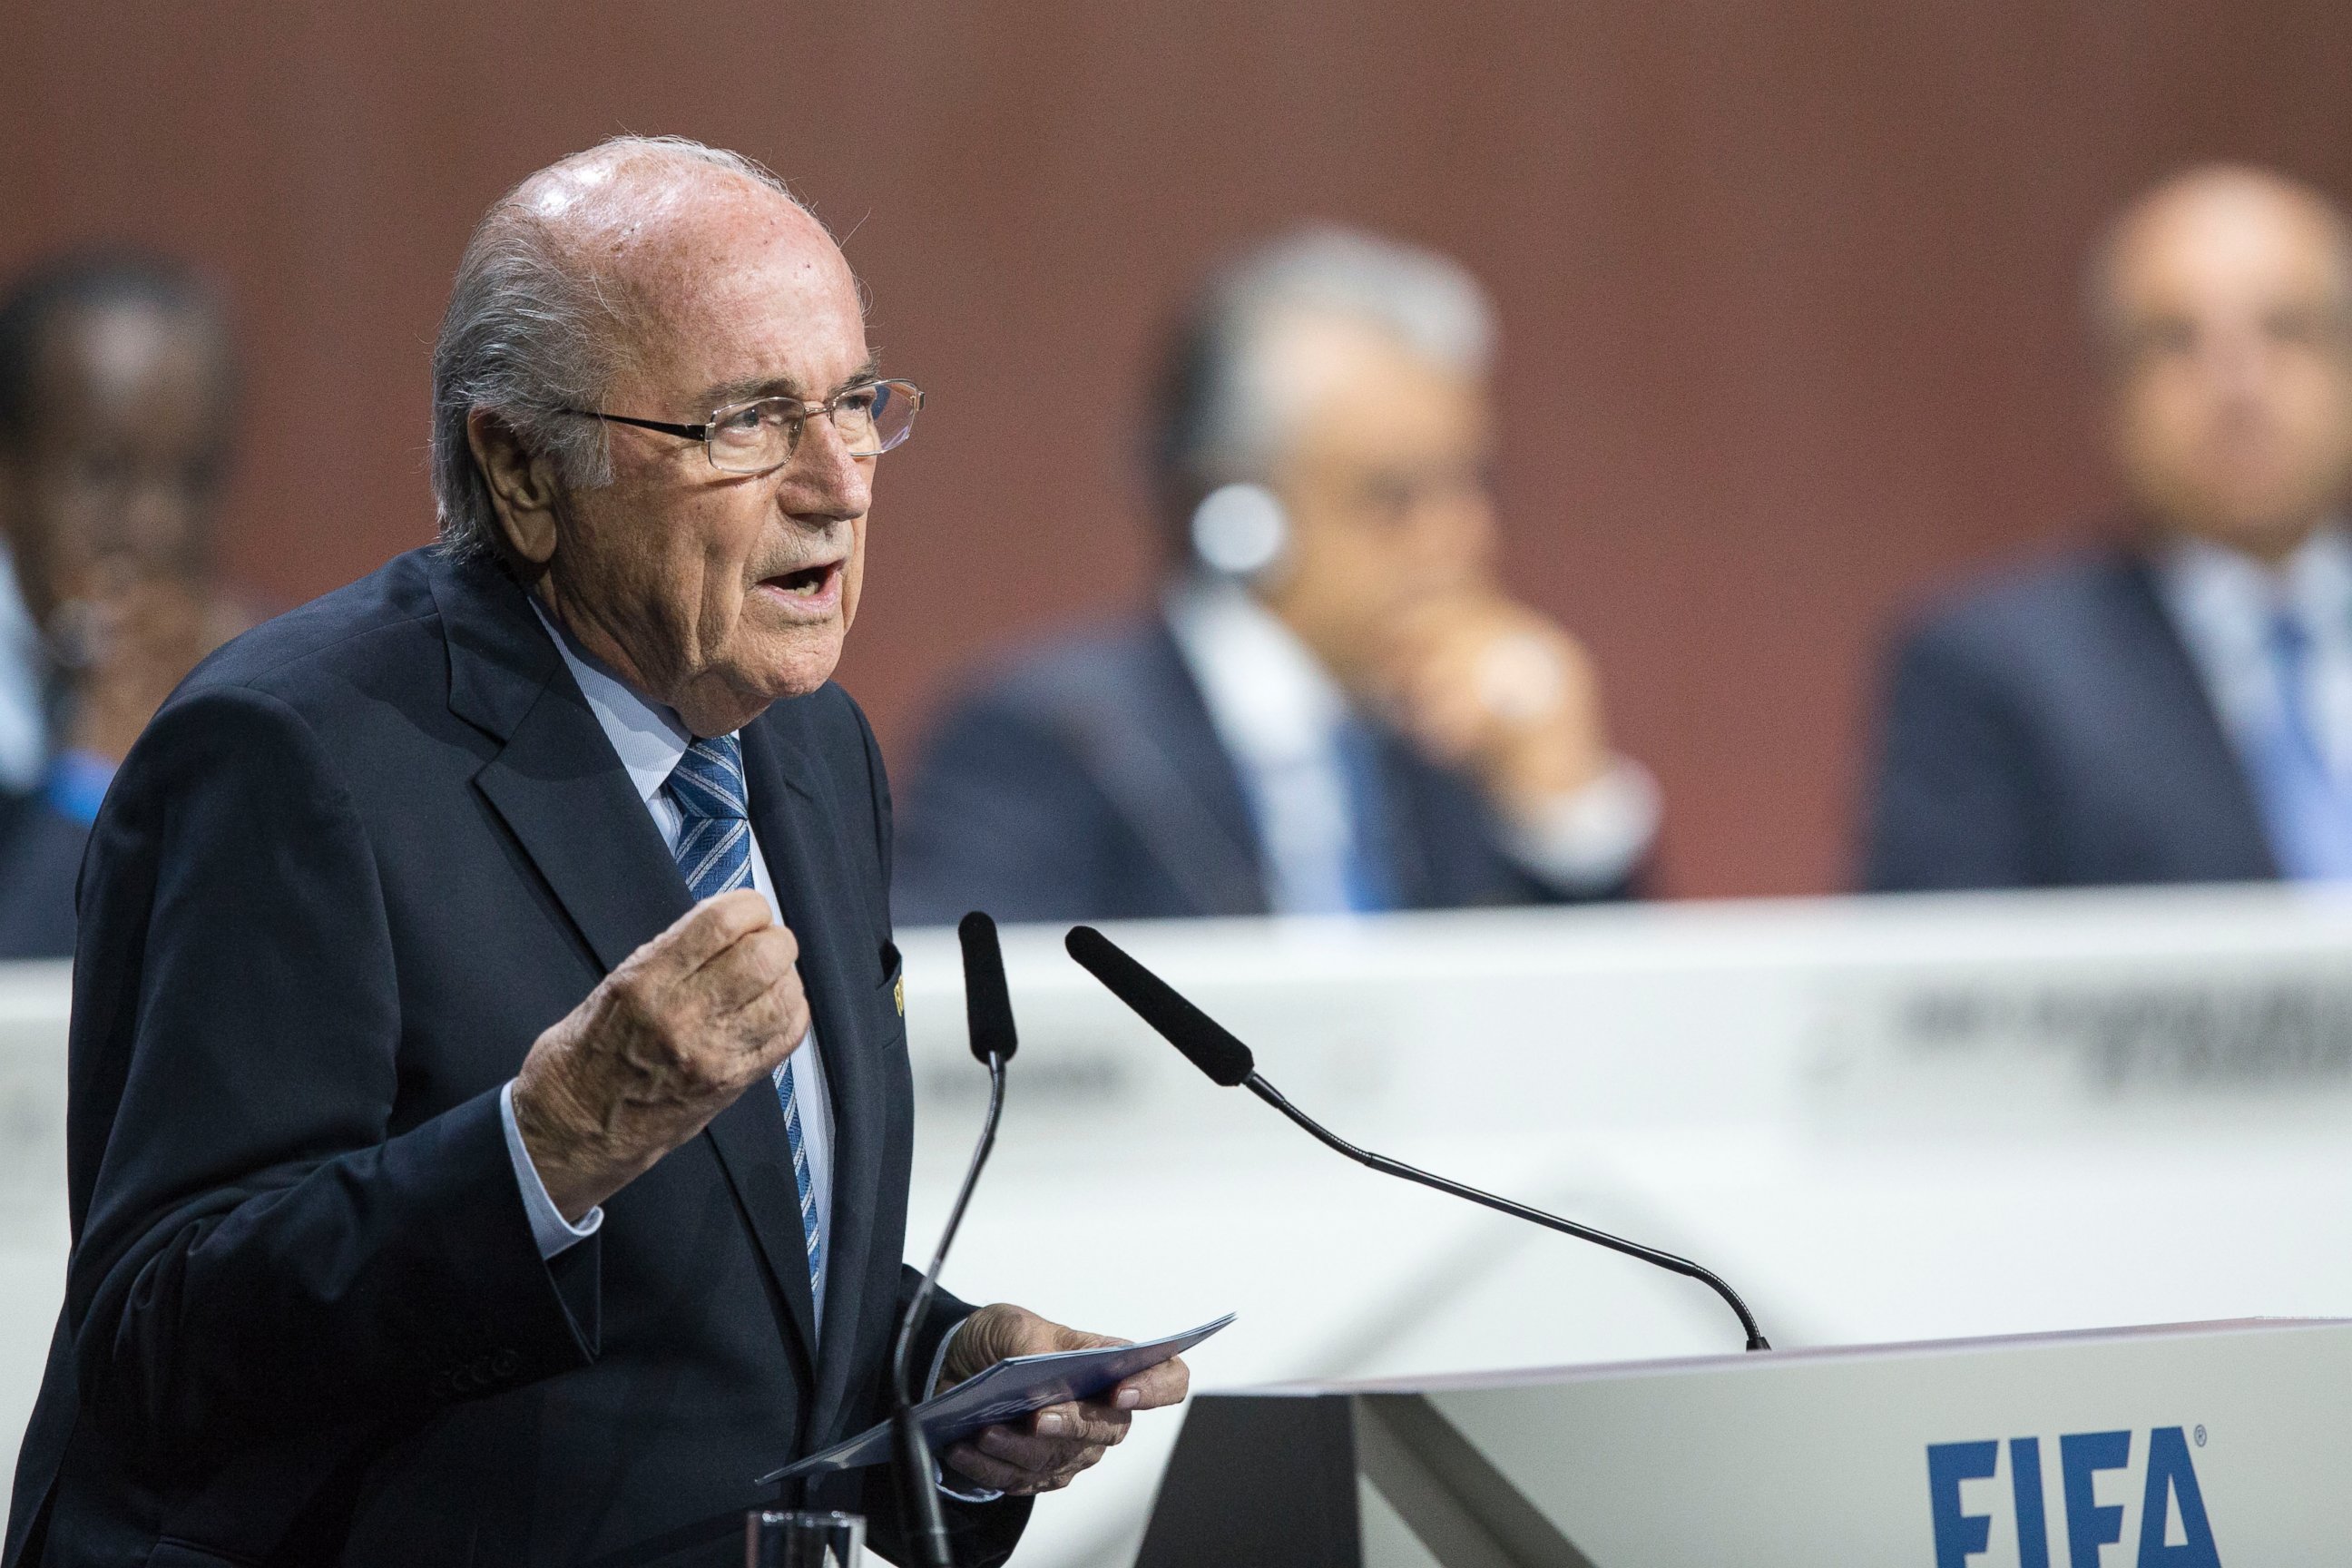 PHOTO: FIFA president Joseph S. Blatter speaks during the 65th FIFA Congress held at the Hallenstadion in Zurich, Switzerland, May 29, 2015, where he runs for re-election. 